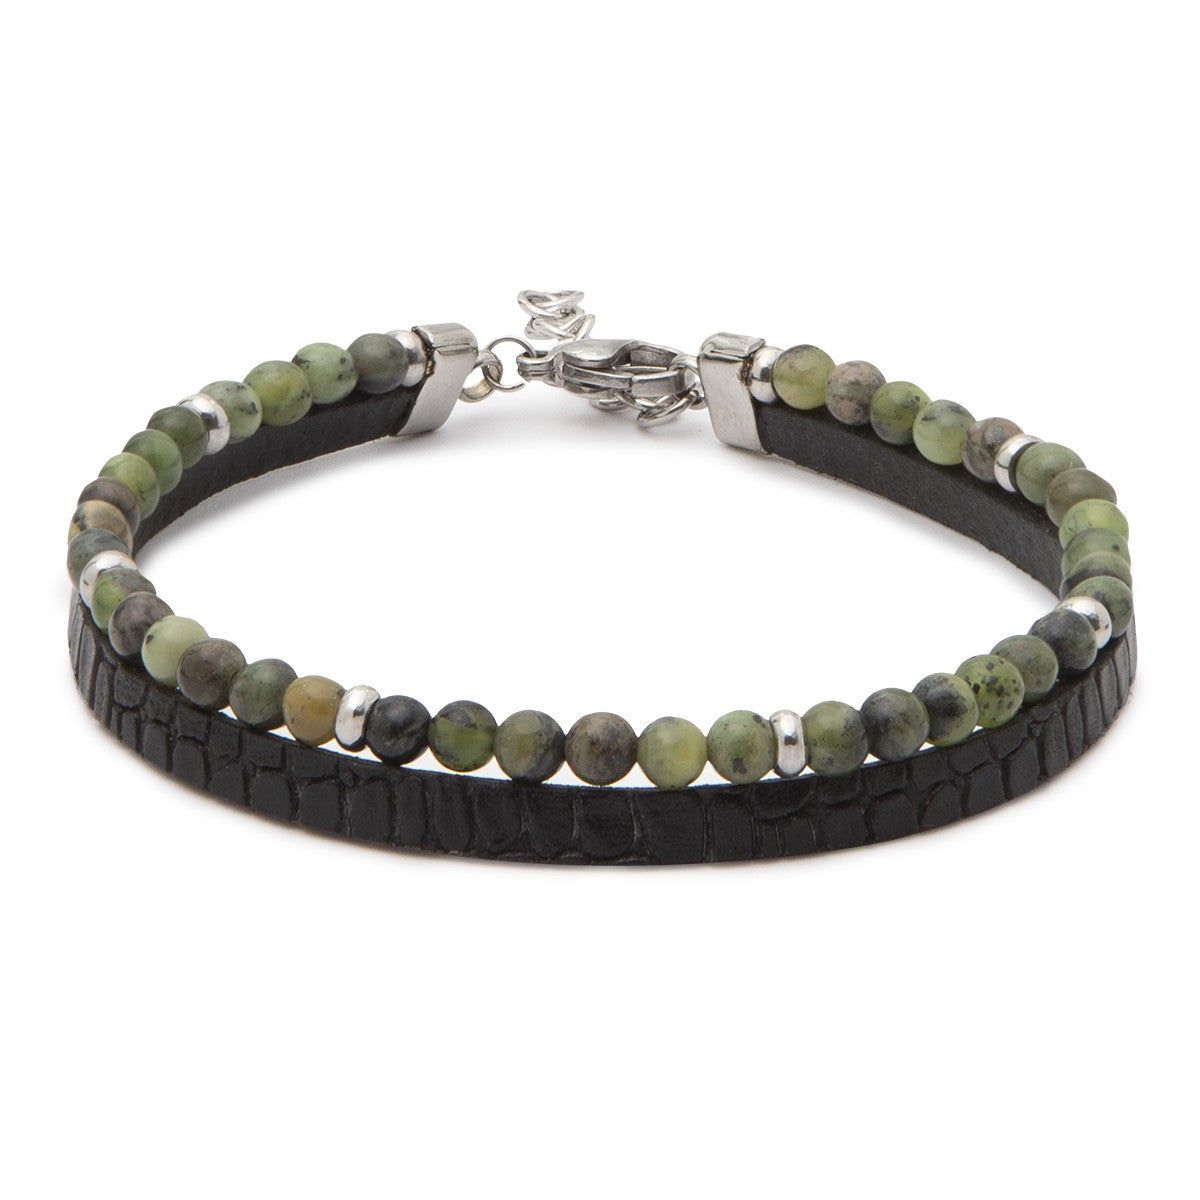 LEATHER AND GREEN STONES BRACELET